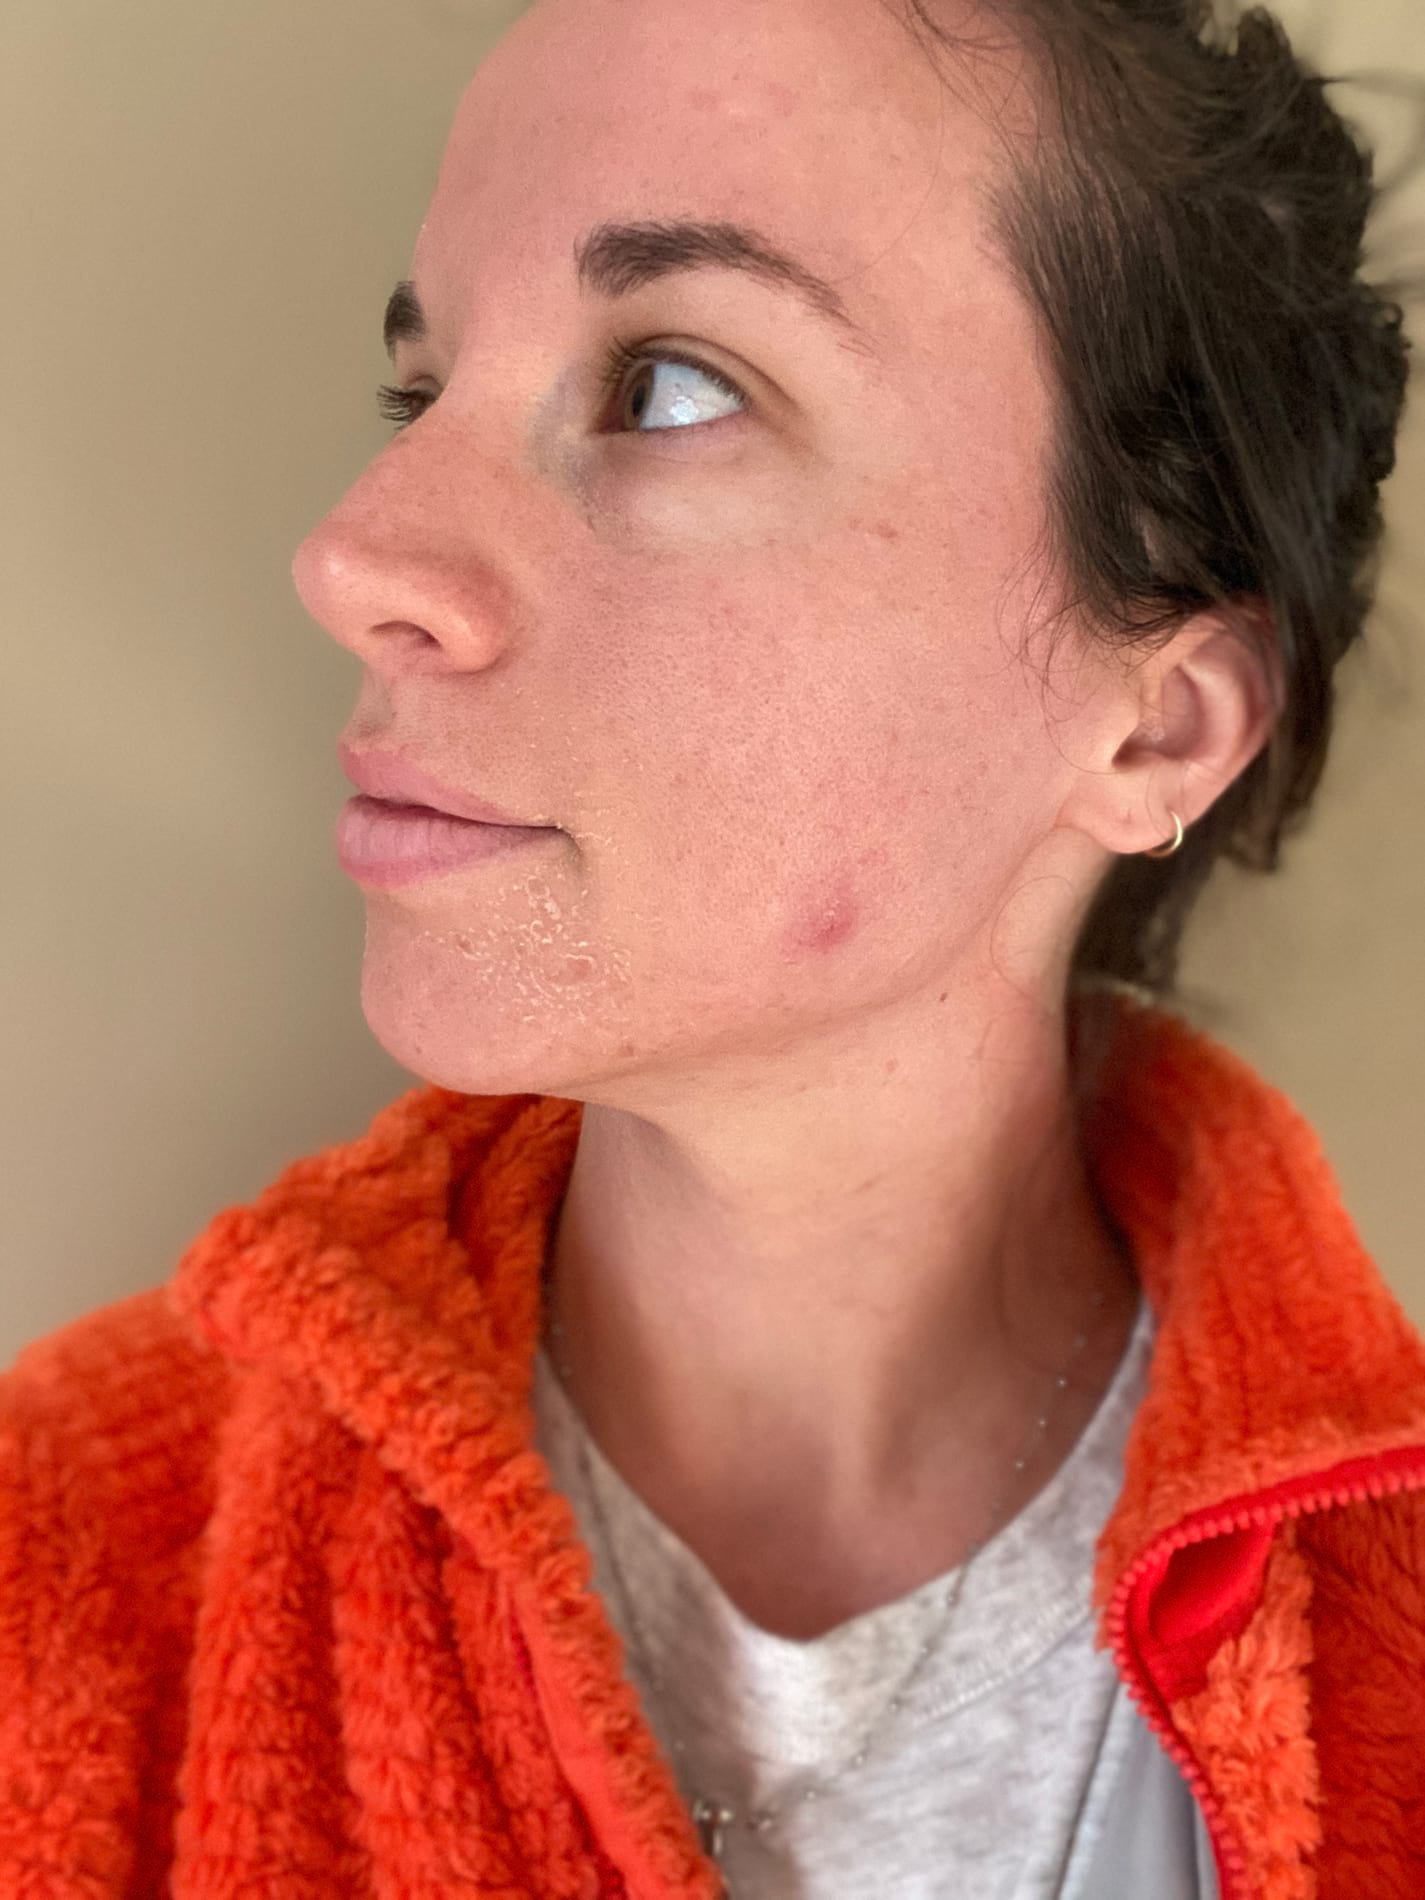 2 Days After Medium-level Chemical Peel showing some mild peeling on the left chin area.